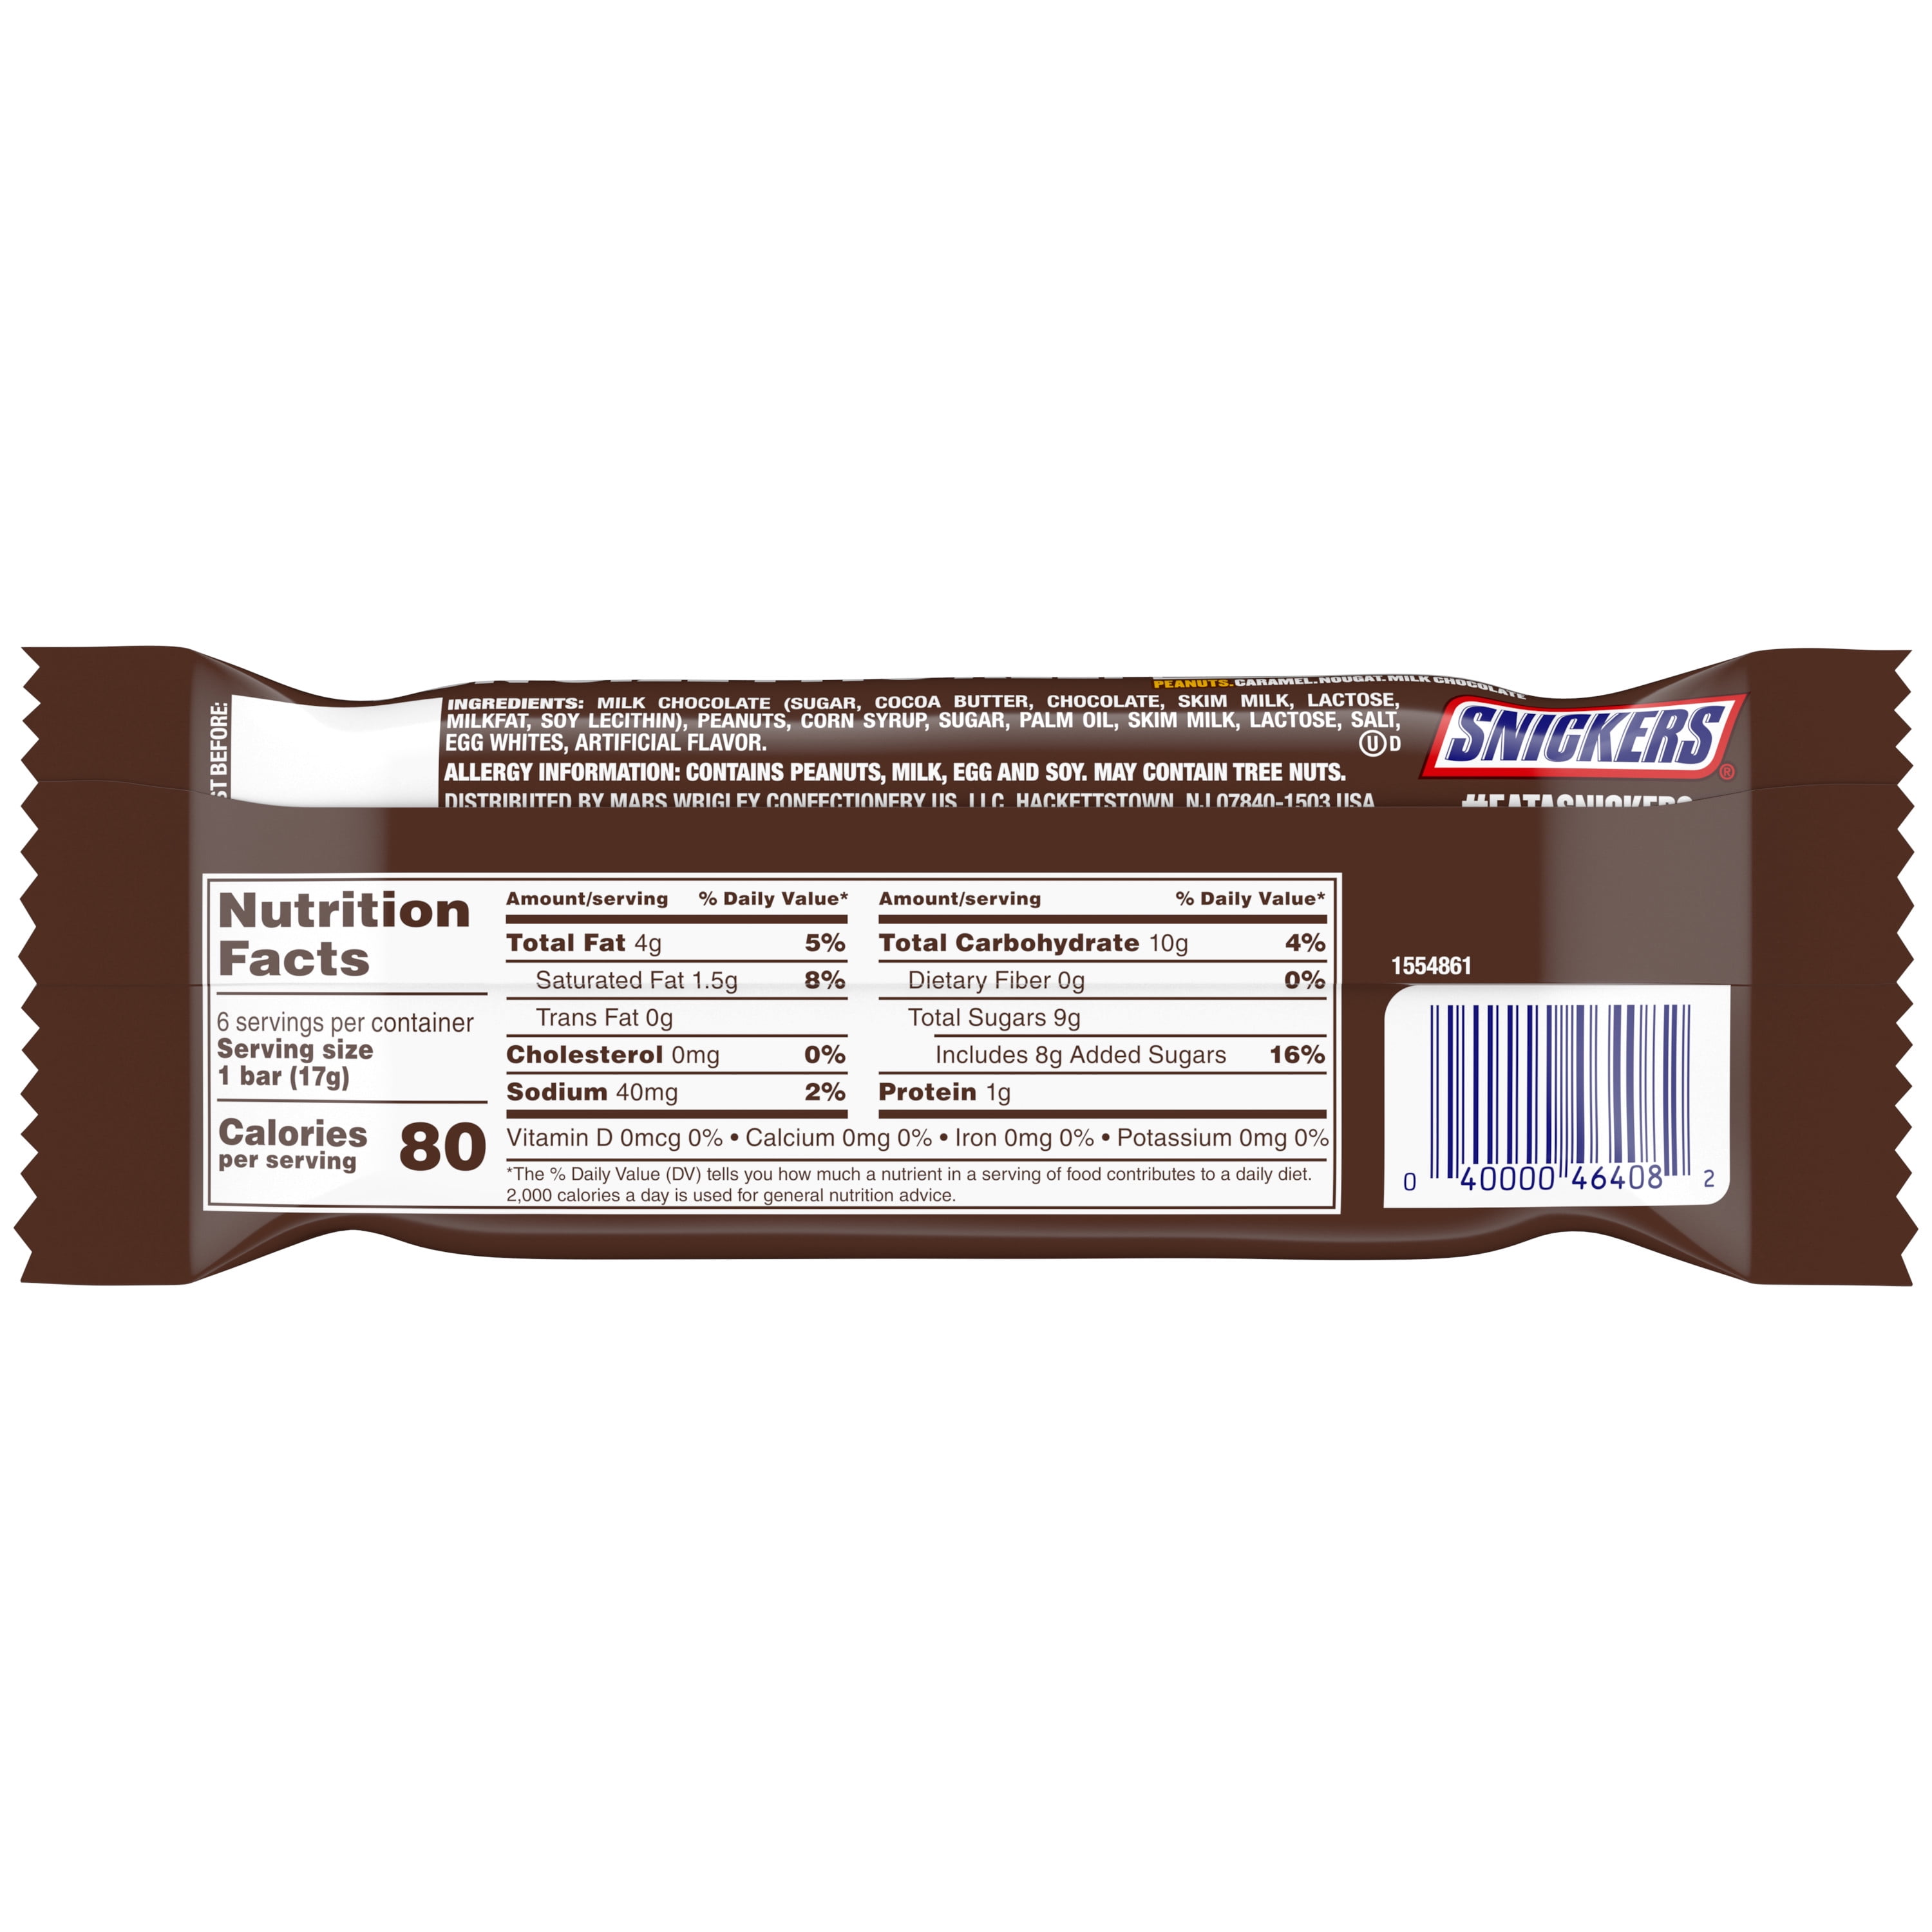 Snickers Candy Bars, Fun Size - 11.18 oz